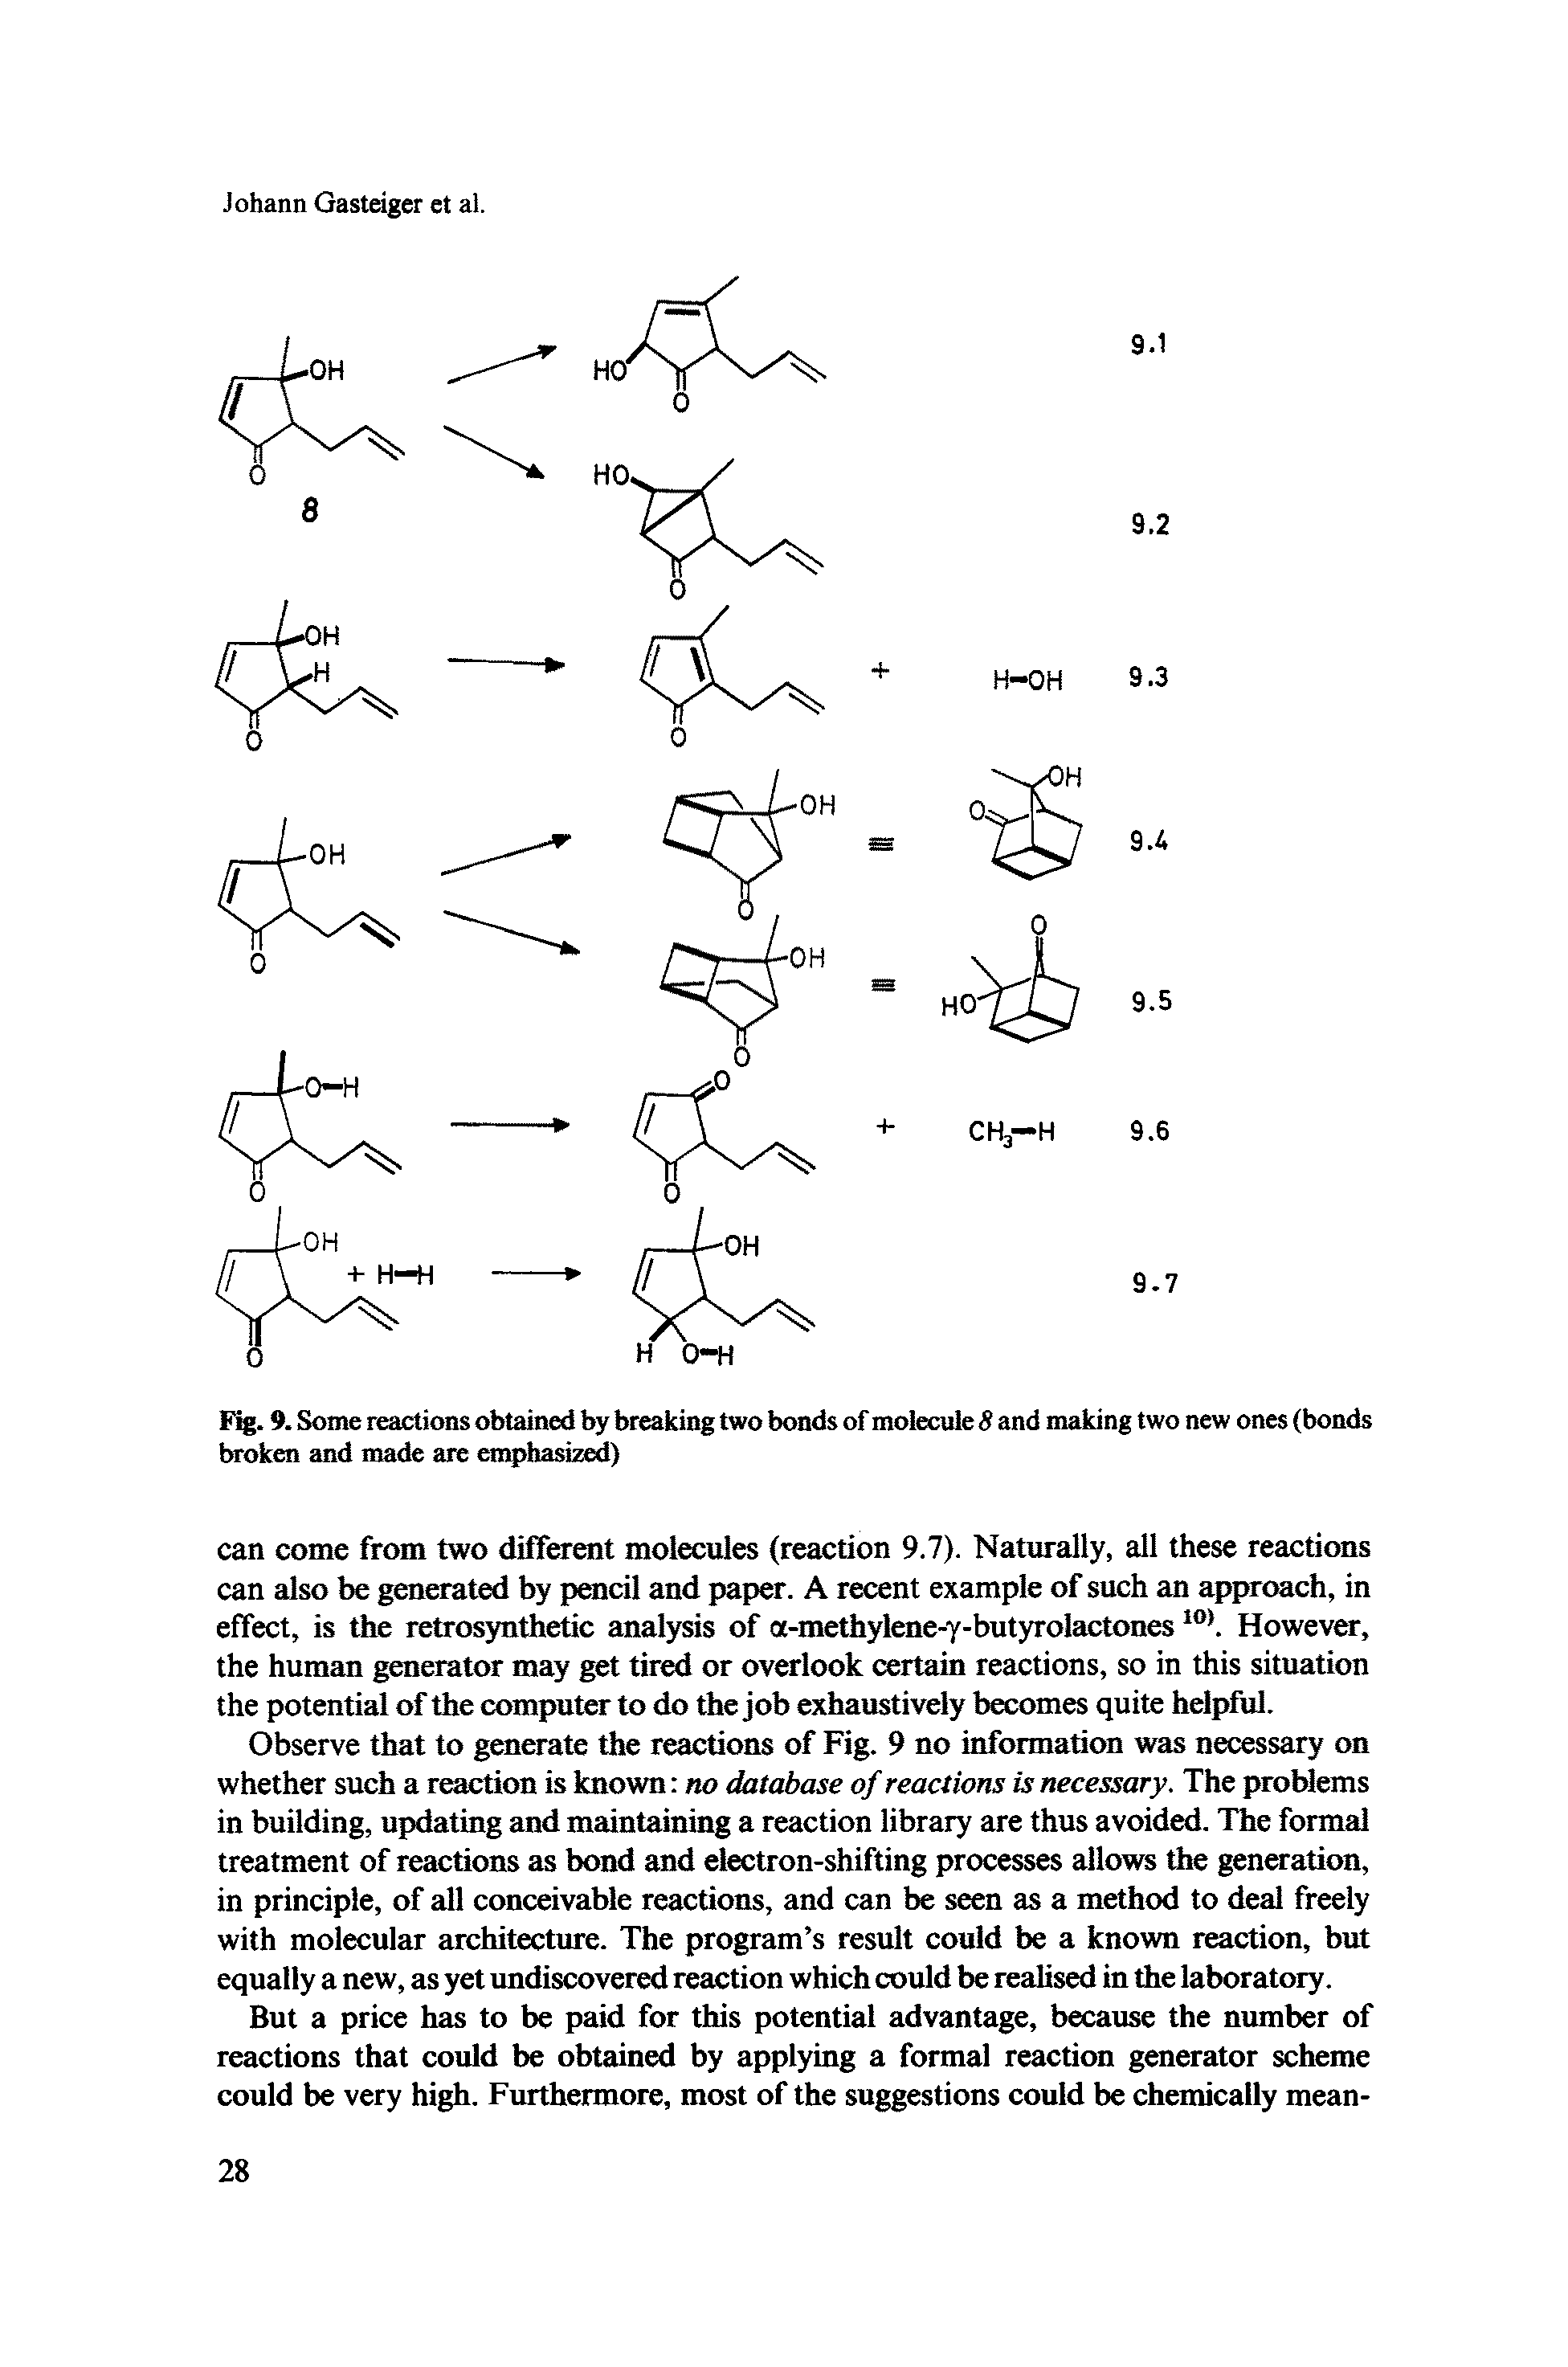 Fig. 9. Some reactions obtained by breaking two bonds of molecule 8 and making two new ones (bonds broken and made are emphasized)...